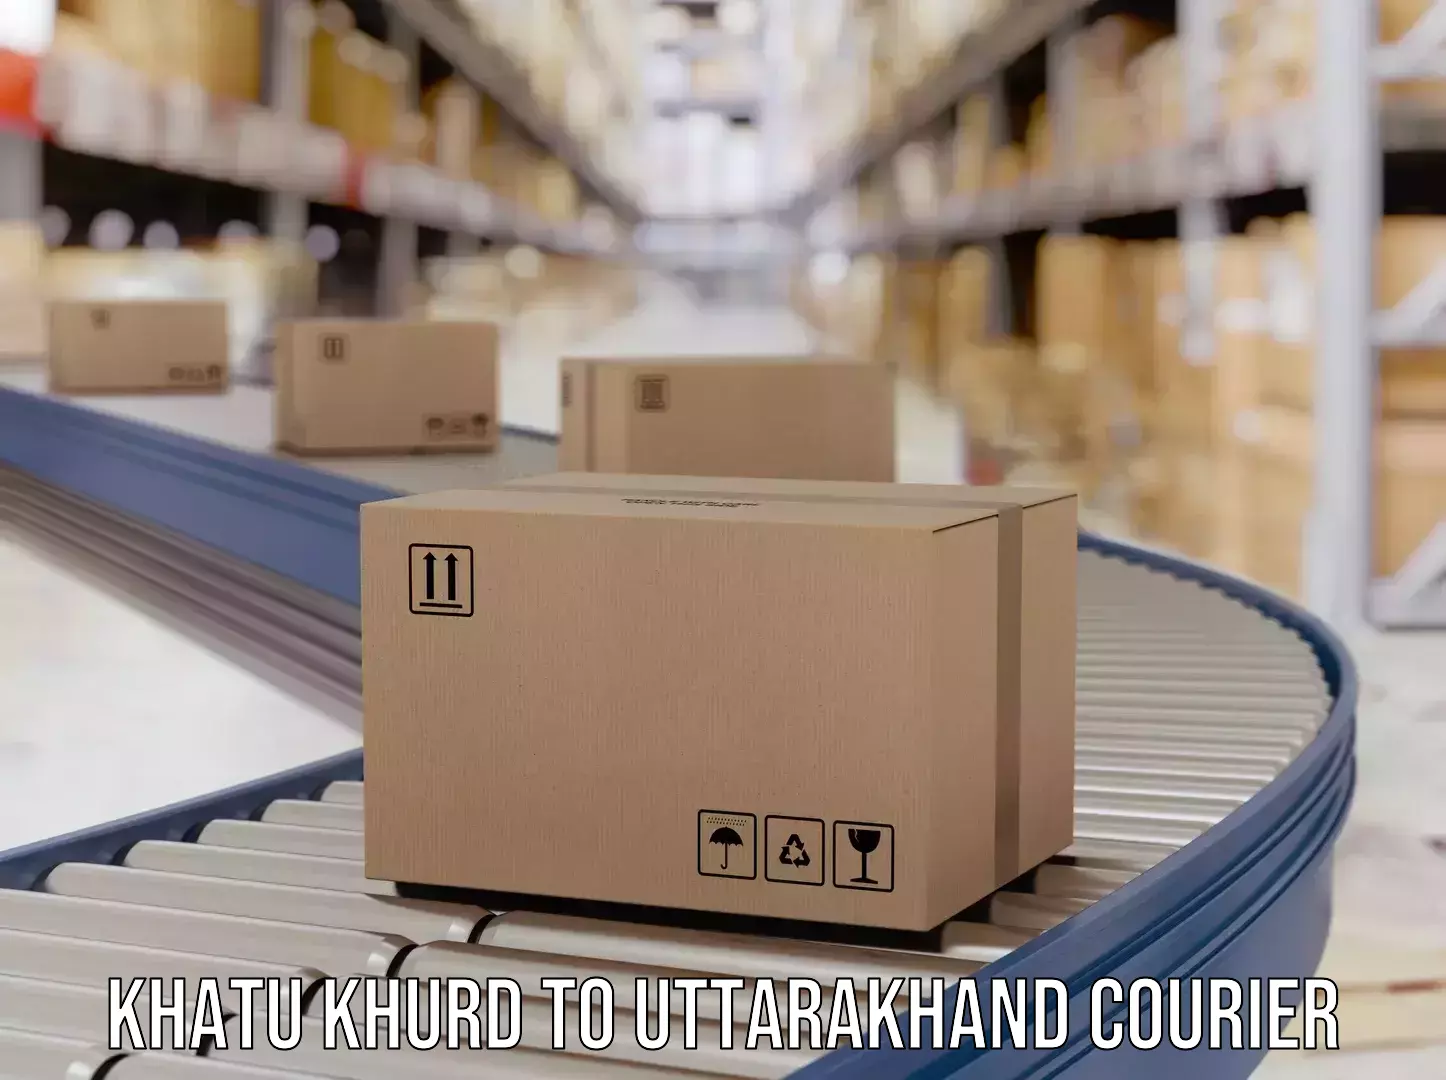 Cost-effective shipping solutions Khatu Khurd to Rudrapur